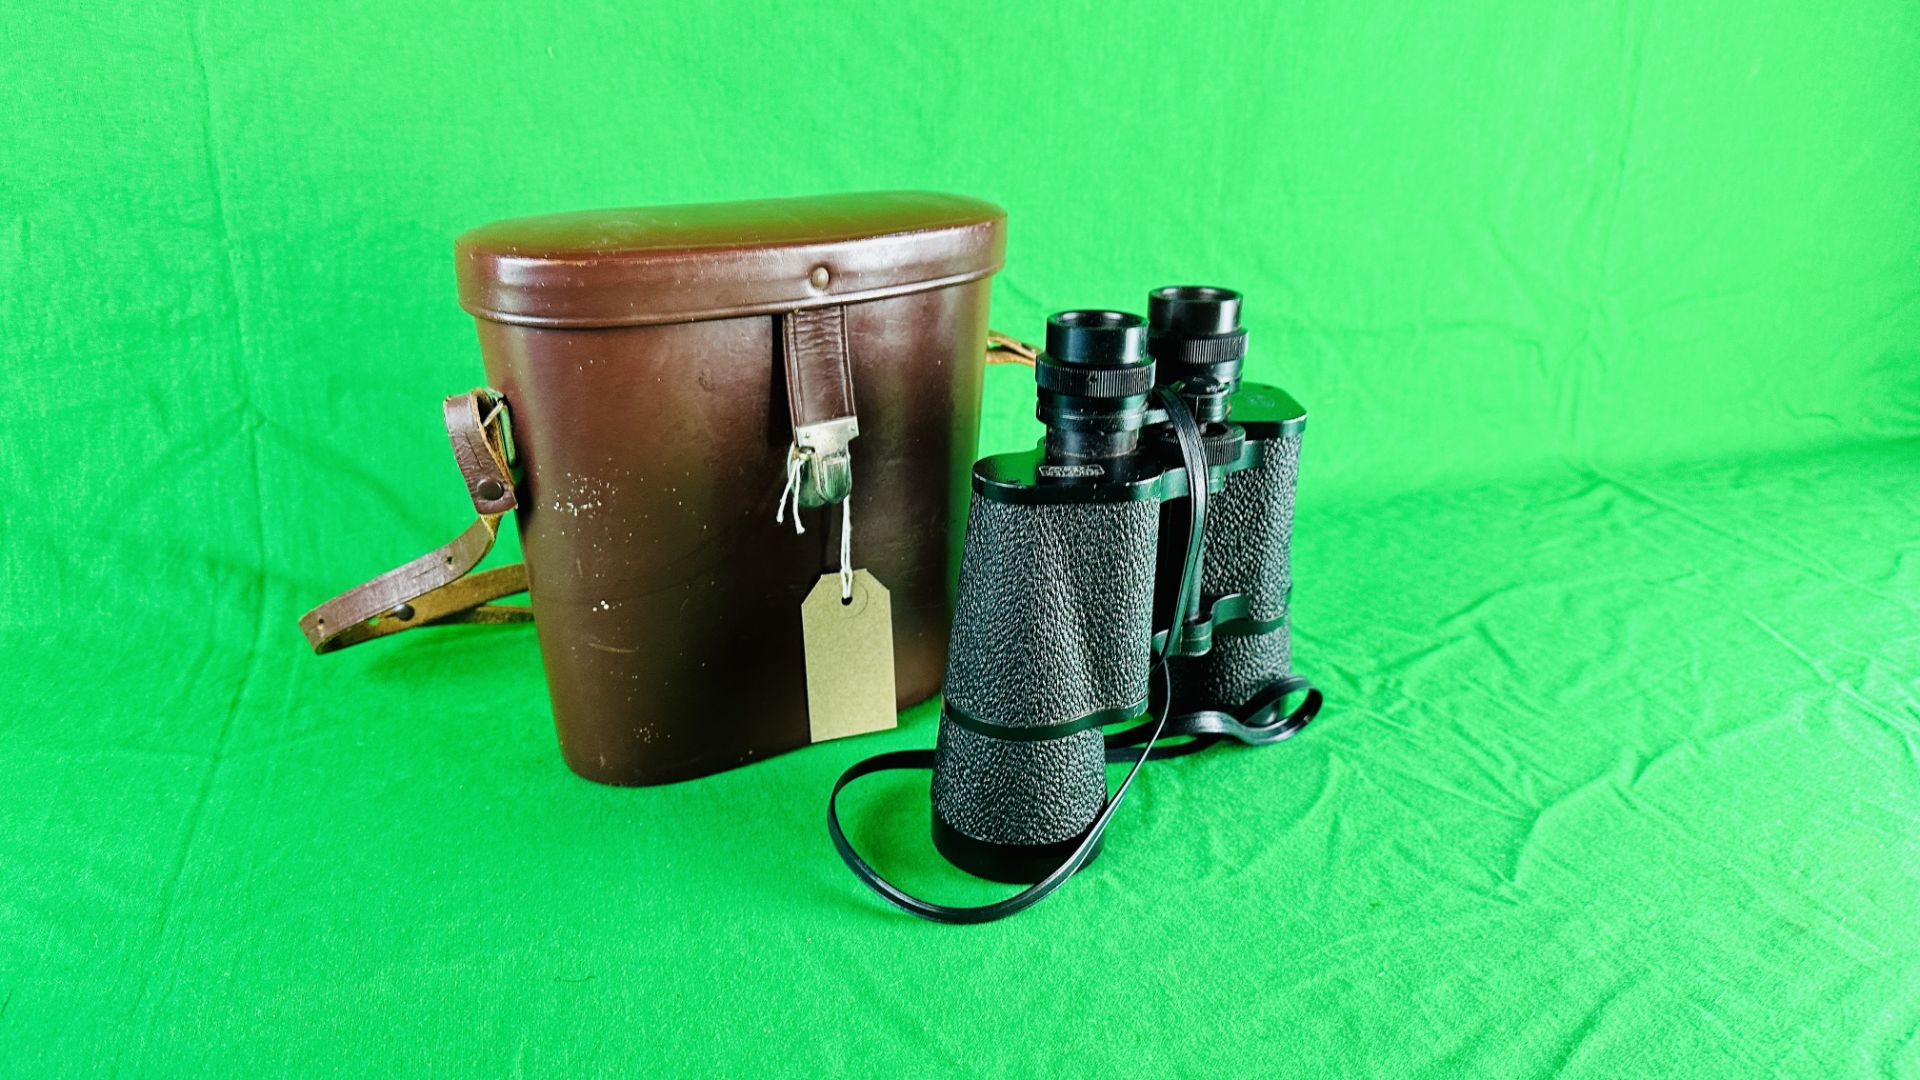 PAIR OF CARL ZEISS JENOPTEM 7X50 W BINOCULARS IN LEATHERED CASE - Image 4 of 4